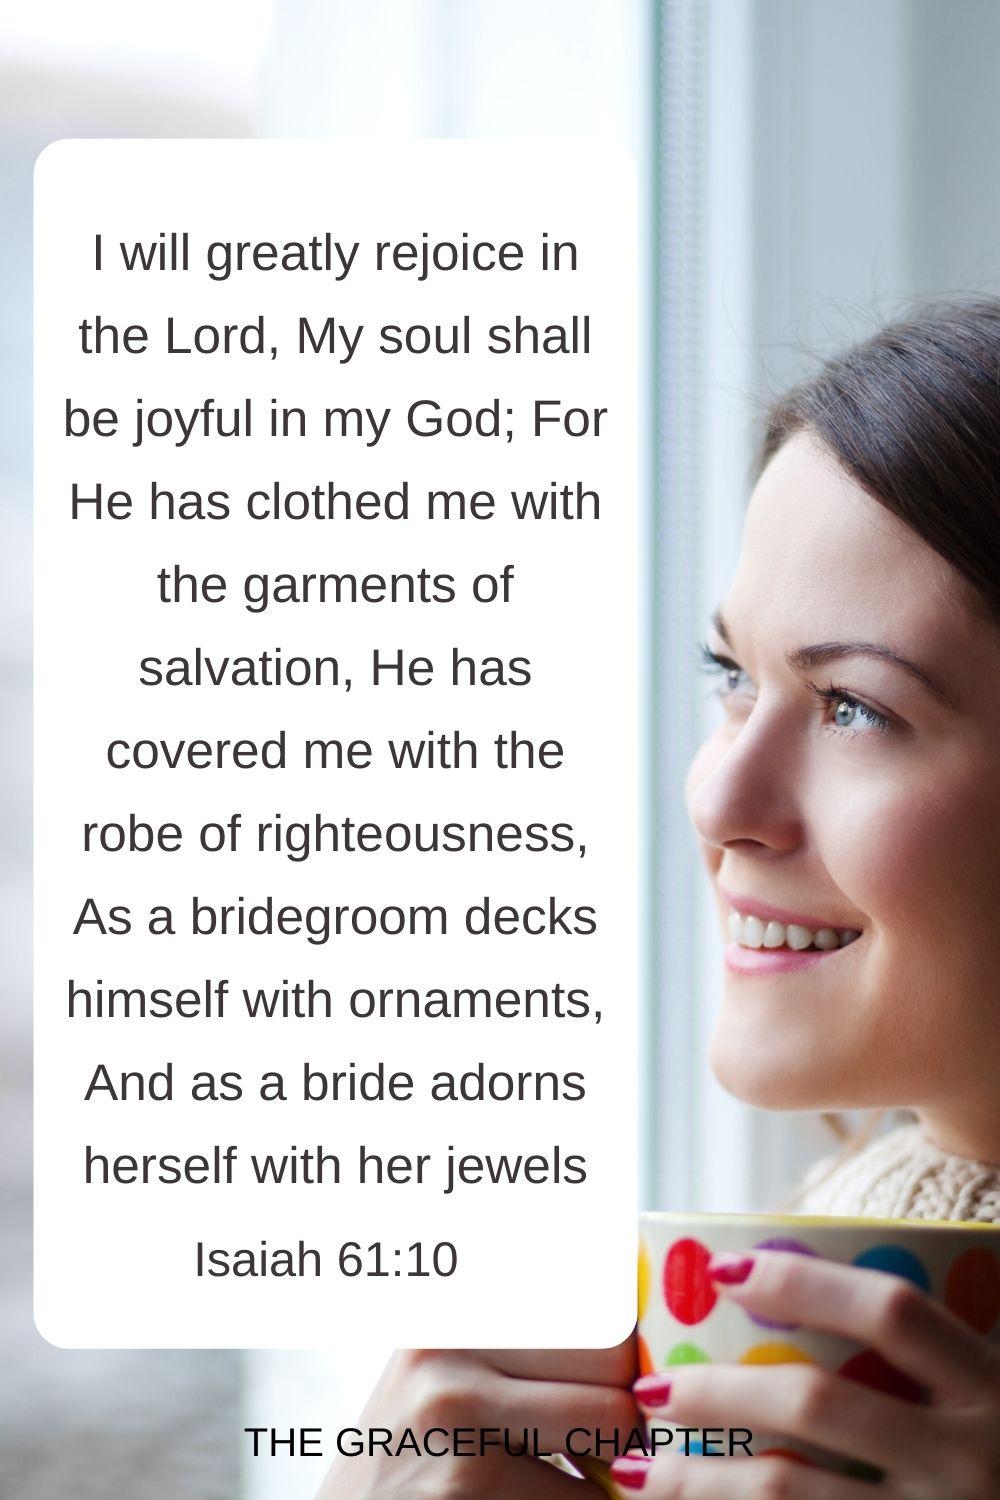 I will greatly rejoice in the Lord, My soul shall be joyful in my God; For He has clothed me with the garments of salvation, He has covered me with the robe of righteousness, As a bridegroom decks himself with ornaments, And as a bride adorns herself with her jewels. Isaiah 61:10